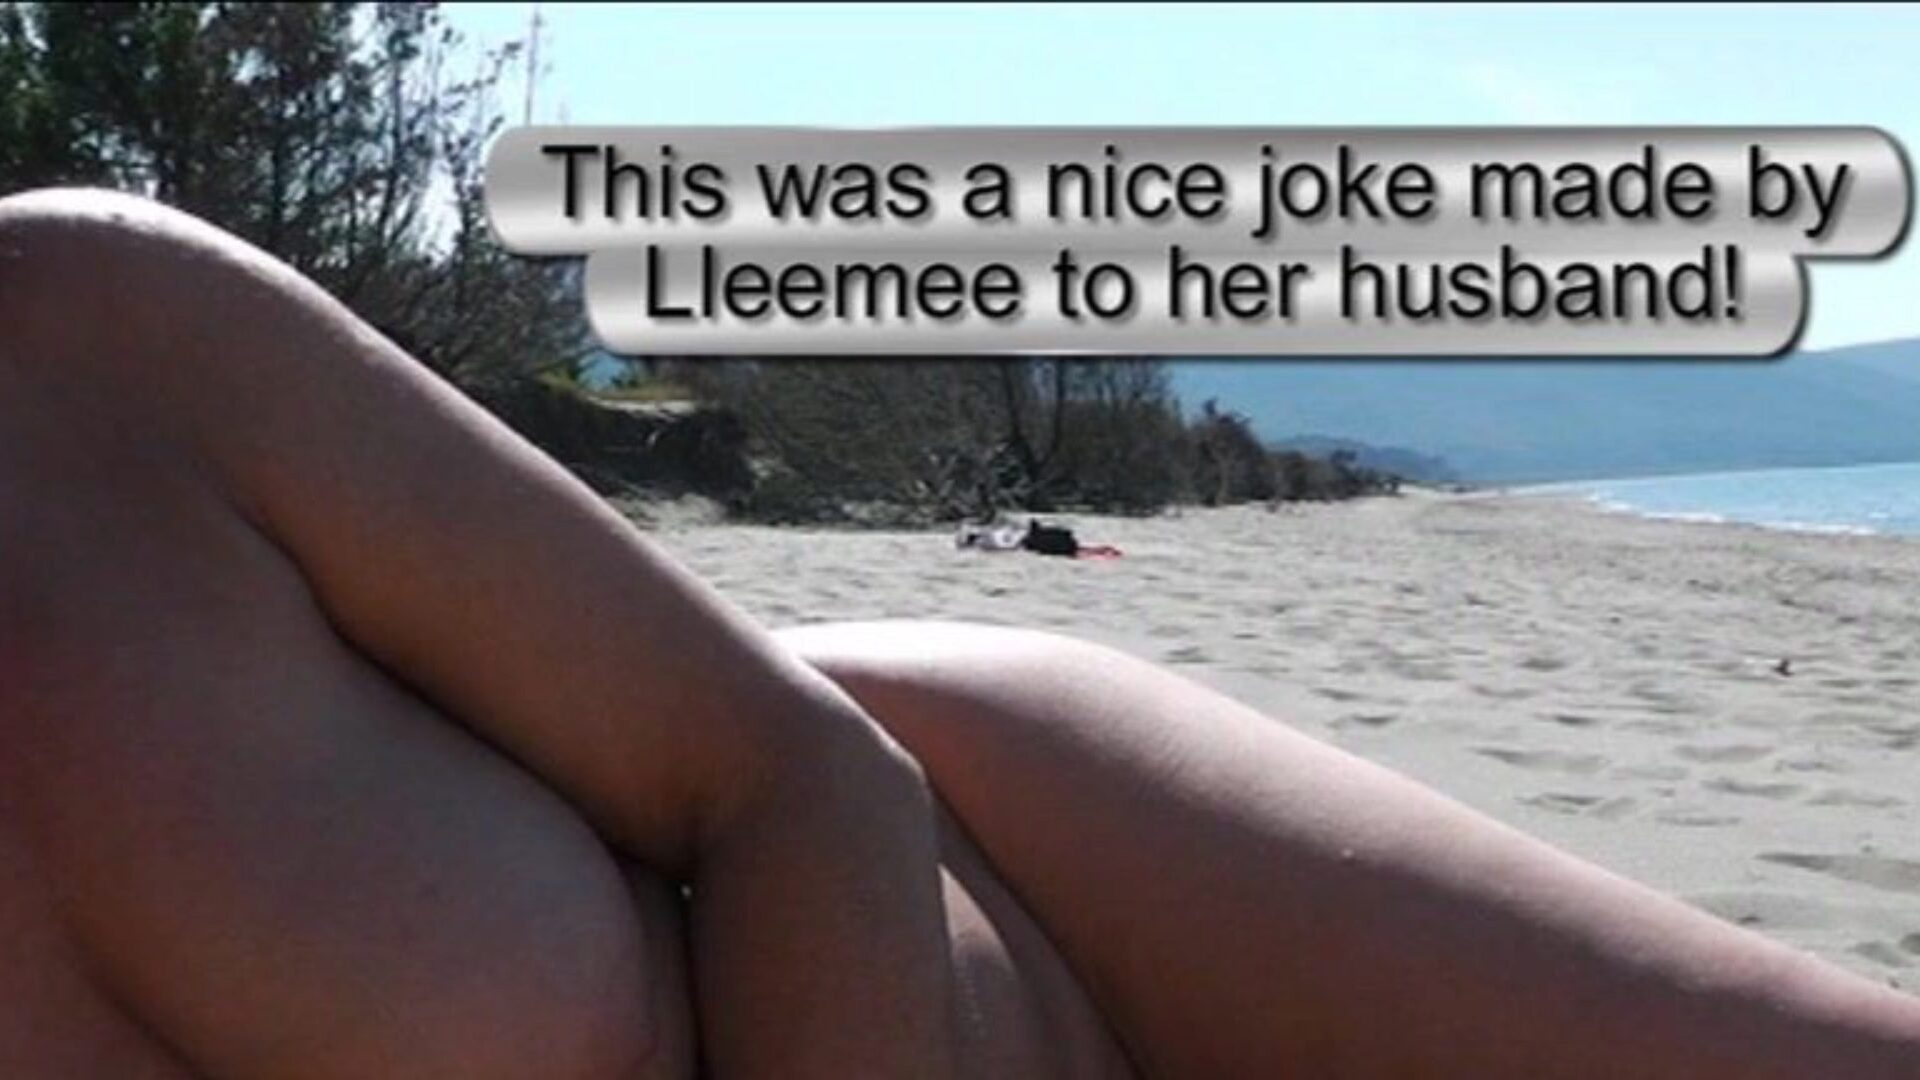 Beach Show masturbation - Man witnessing two A very valuable joke made by Lleemee to her husband